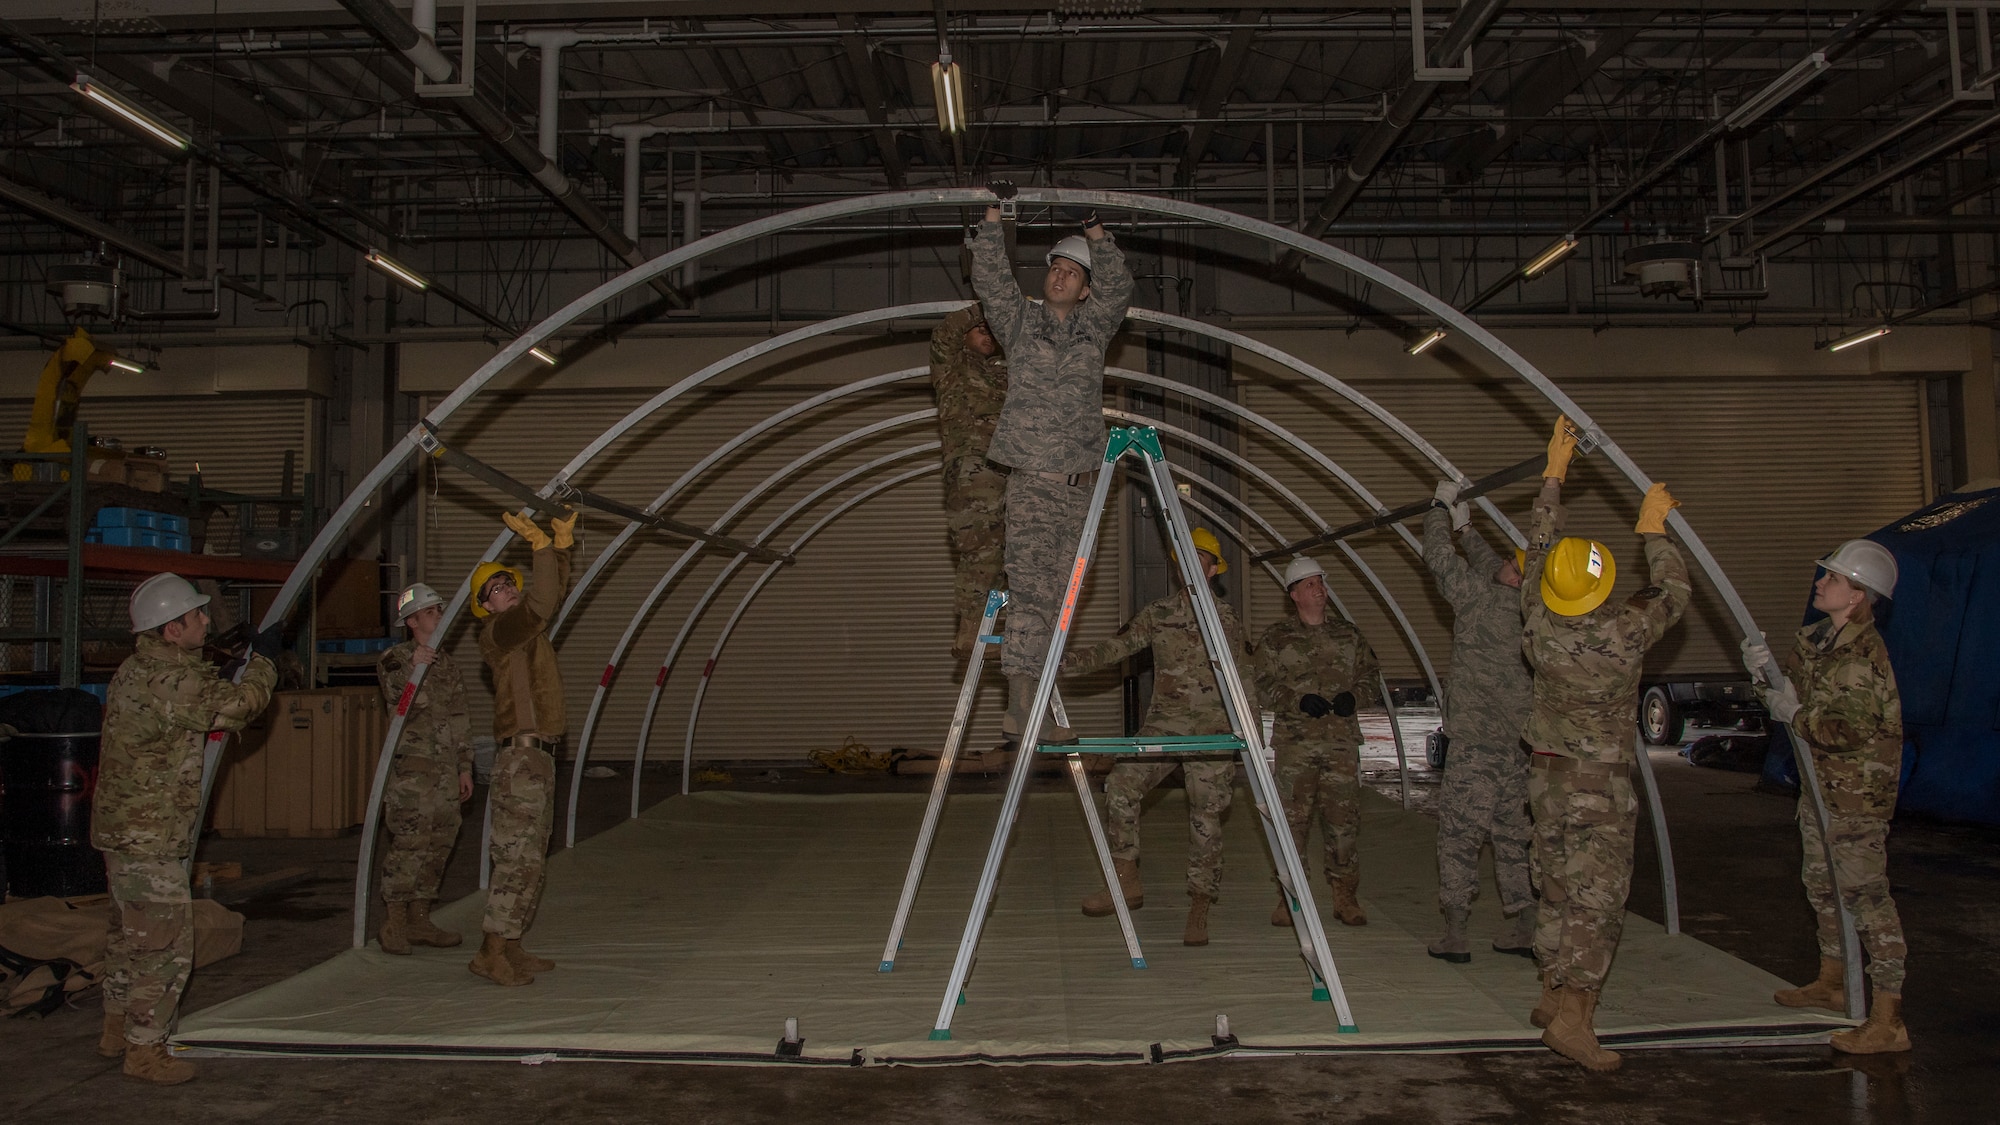 Airmen from the 35th Fighter Wing set up an Alaskan shelter system at Misawa Air Base, Japan, Jan. 29, 2020. More than 25 Airmen from the 35th Operations support squadron, 35th Logistics Readiness squadron, 35th Civil Engineer Squadron, 35th Force Support Squadron and 35th Aircraft Maintenance Squadron teamed up to enhance their readiness by participating in the first Multi-Domain Airman training. (U.S. Air Force photo by Airman 1st Class China M. Shock)